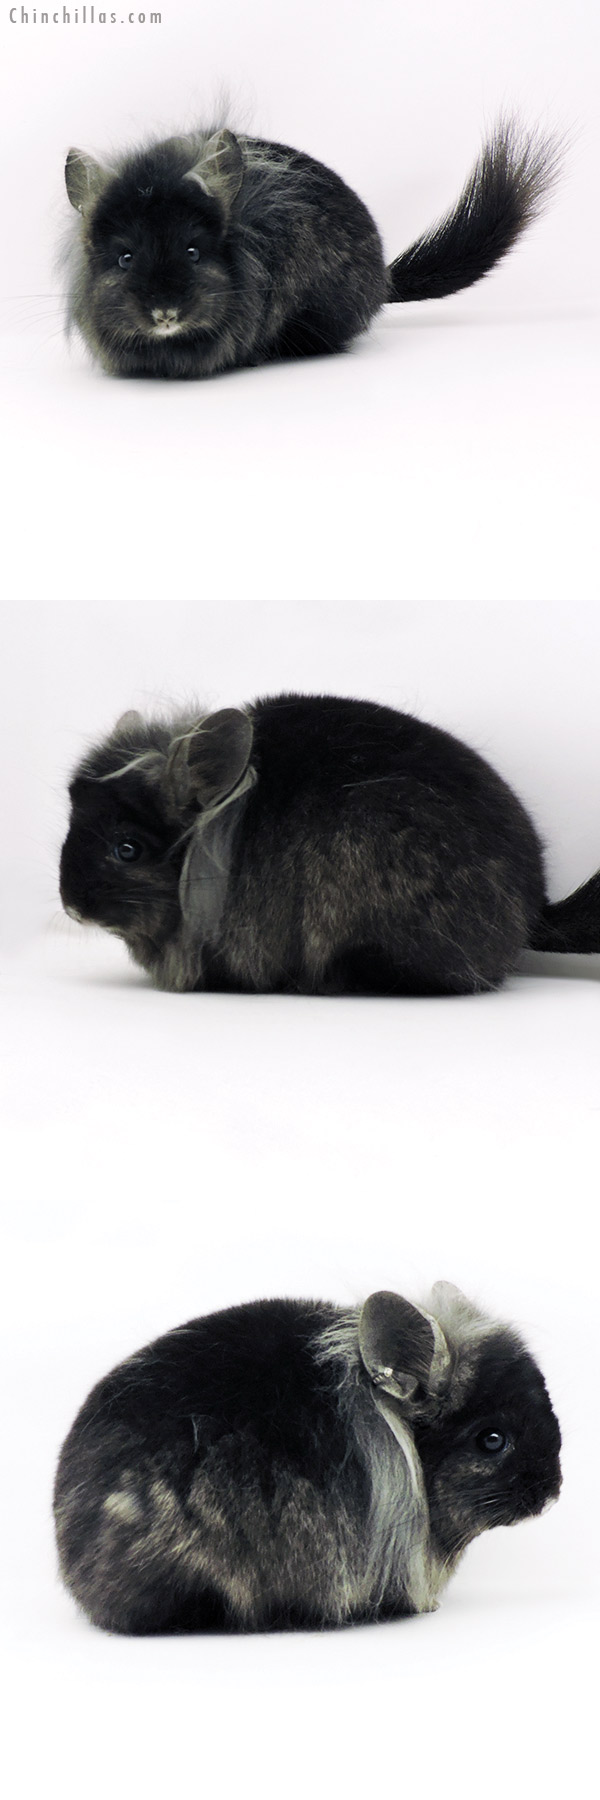 Chinchilla or related item offered for sale or export on Chinchillas.com - 19339 Ebony G2  Royal Persian Angora Male Chinchilla